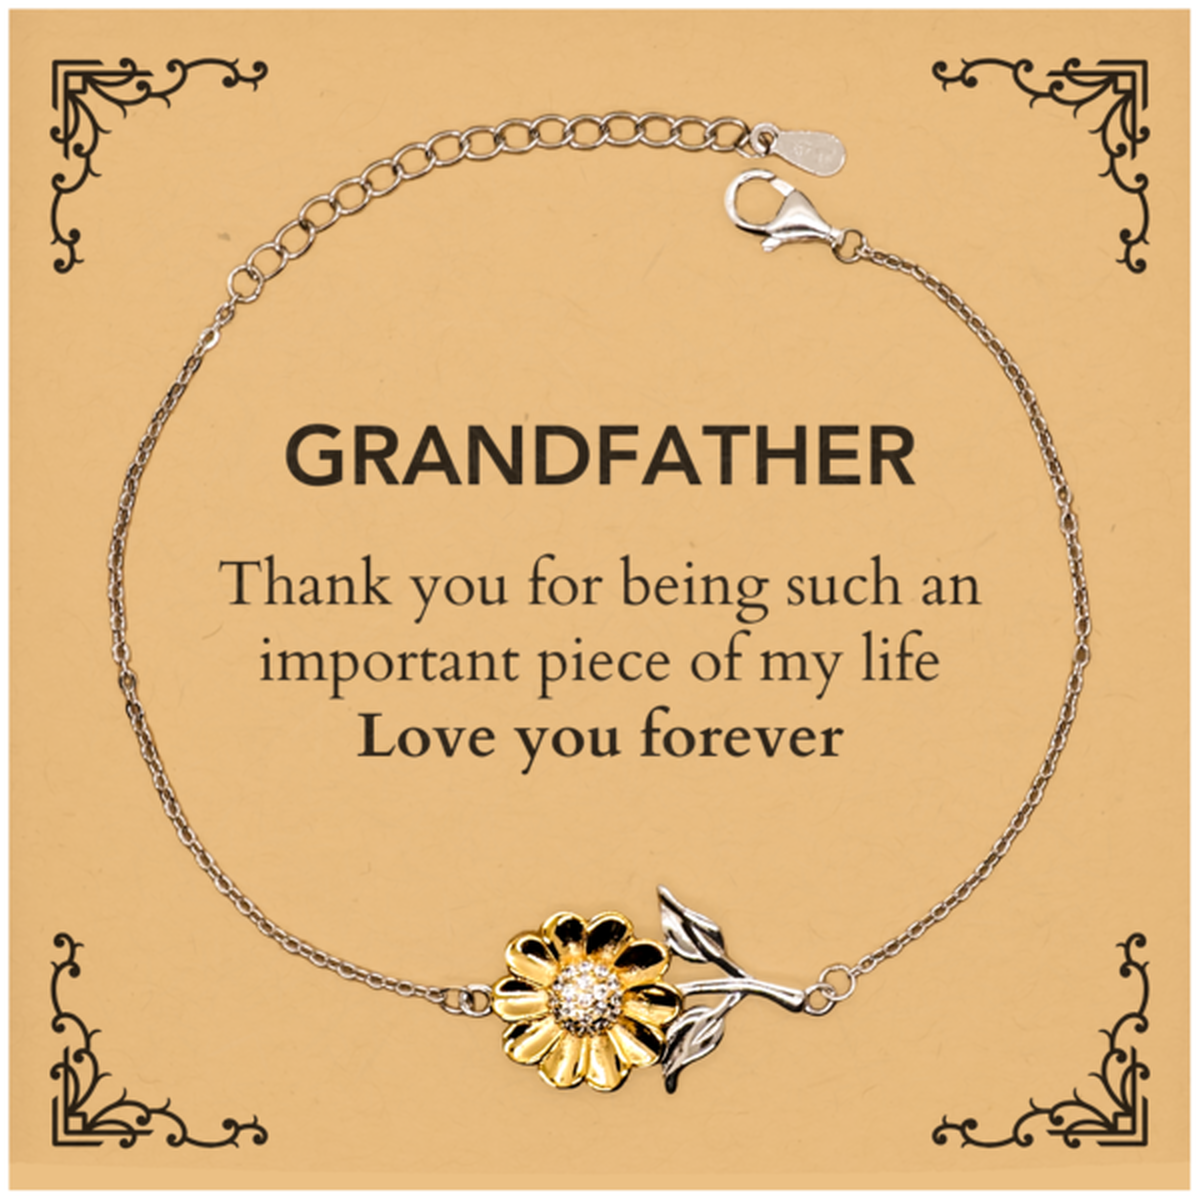 Appropriate Grandfather Sunflower Bracelet Epic Birthday Gifts for Grandfather Thank you for being such an important piece of my life Grandfather Christmas Mothers Fathers Day